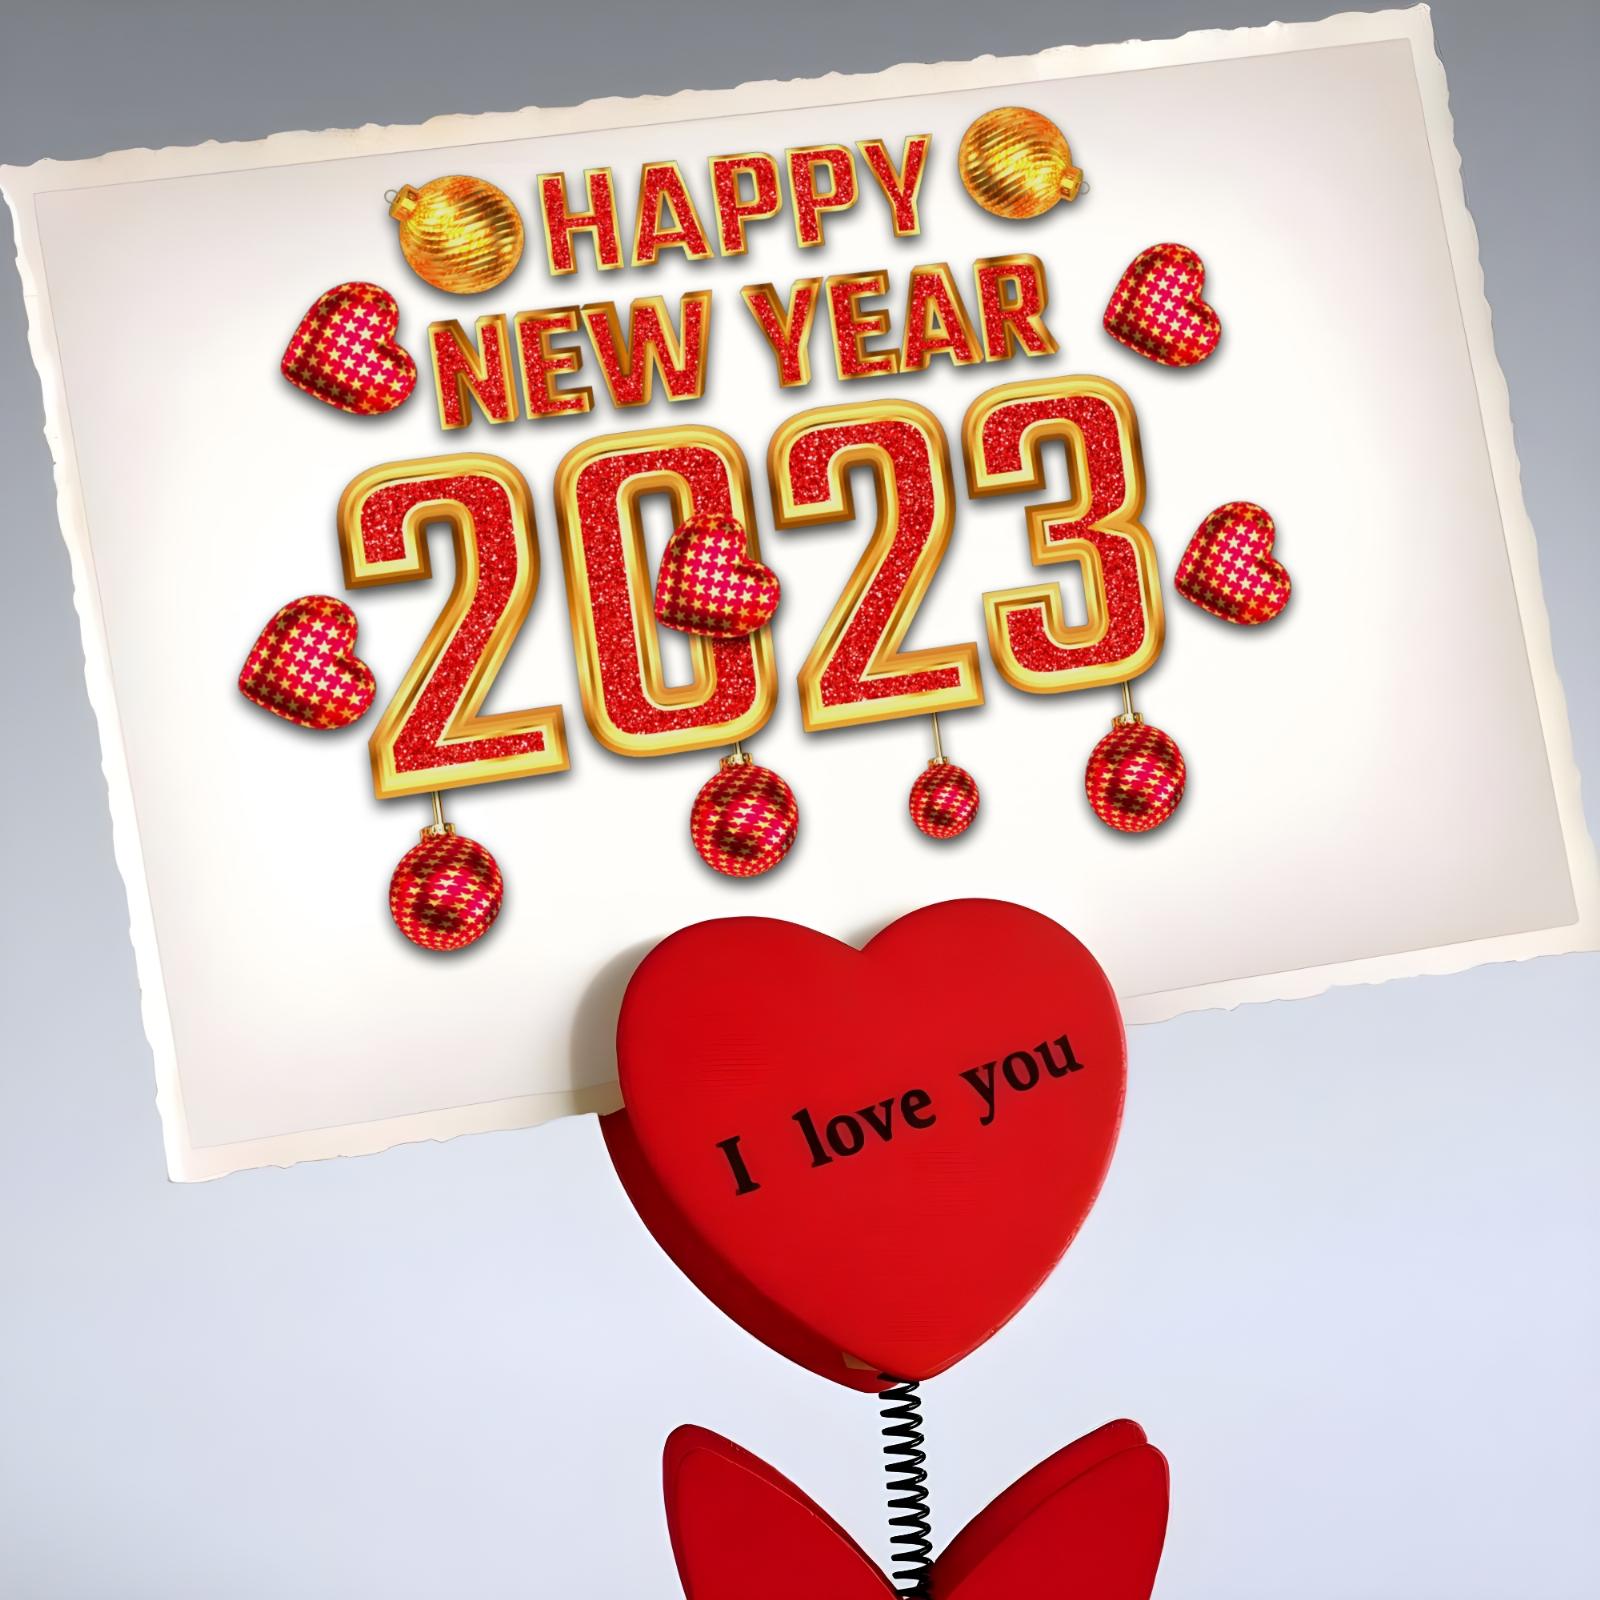 Happy New Year 2023 Images for GF BF